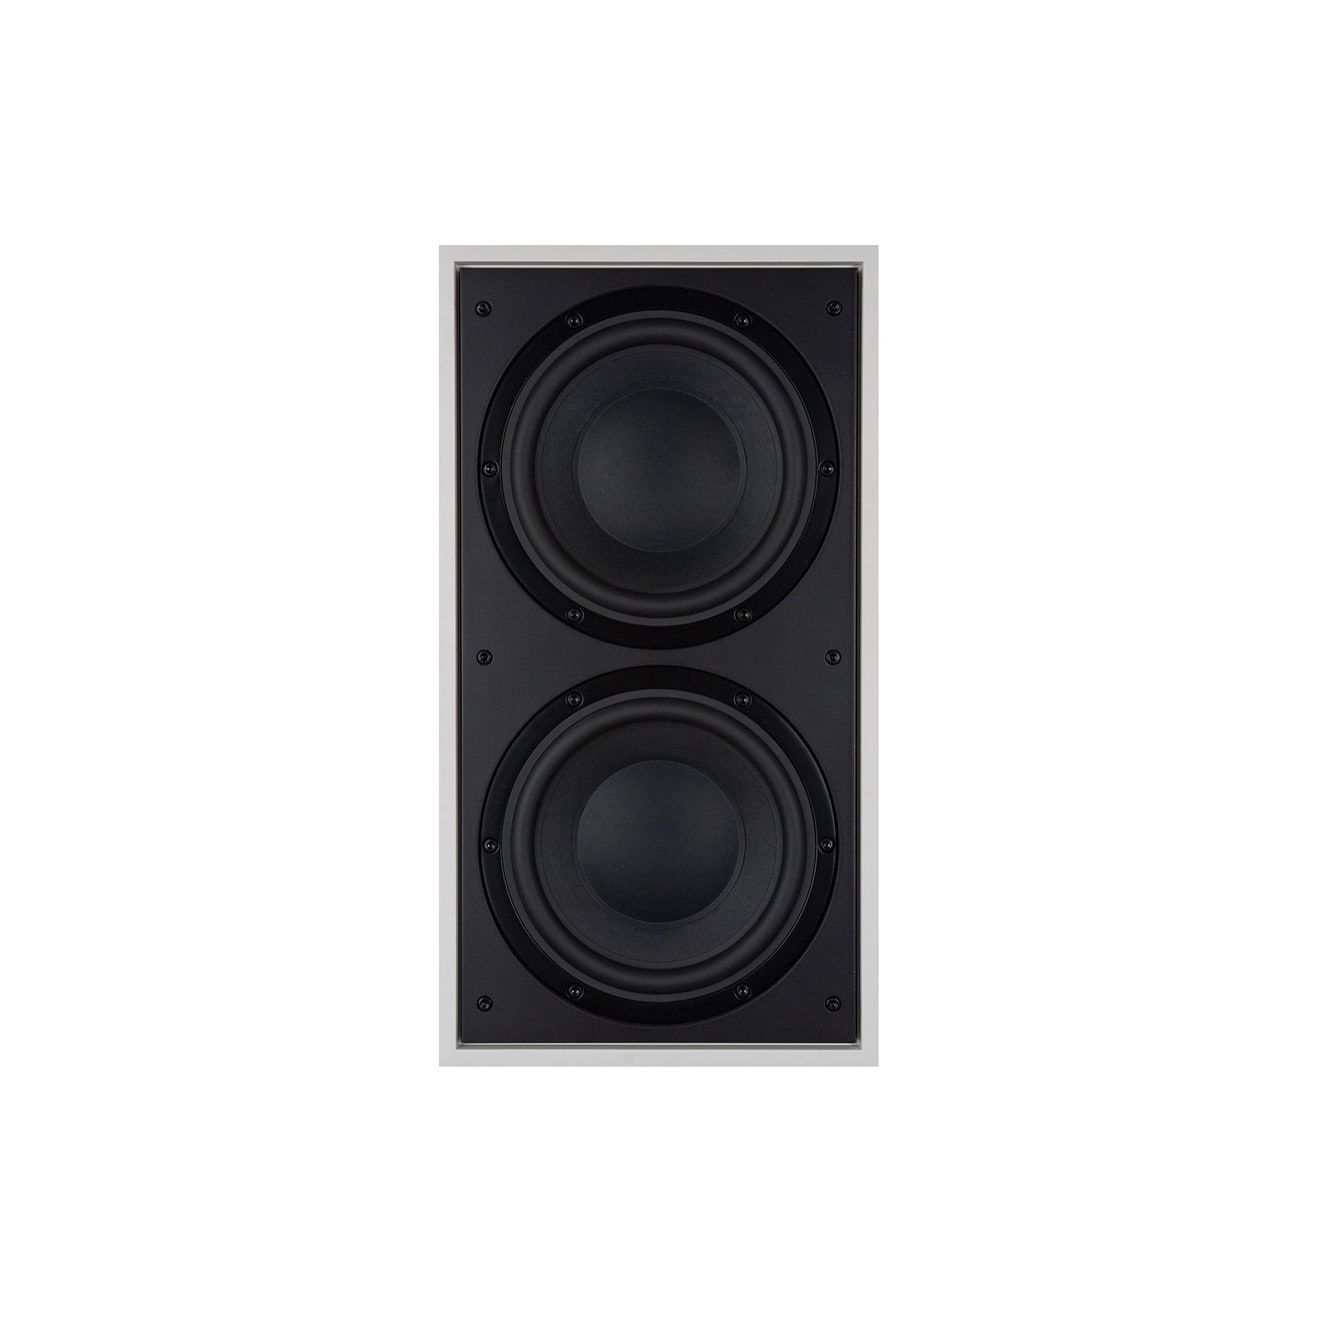 BOWERS & WILKINS ISW-4 DUAL DRIVER SUBWOOFER